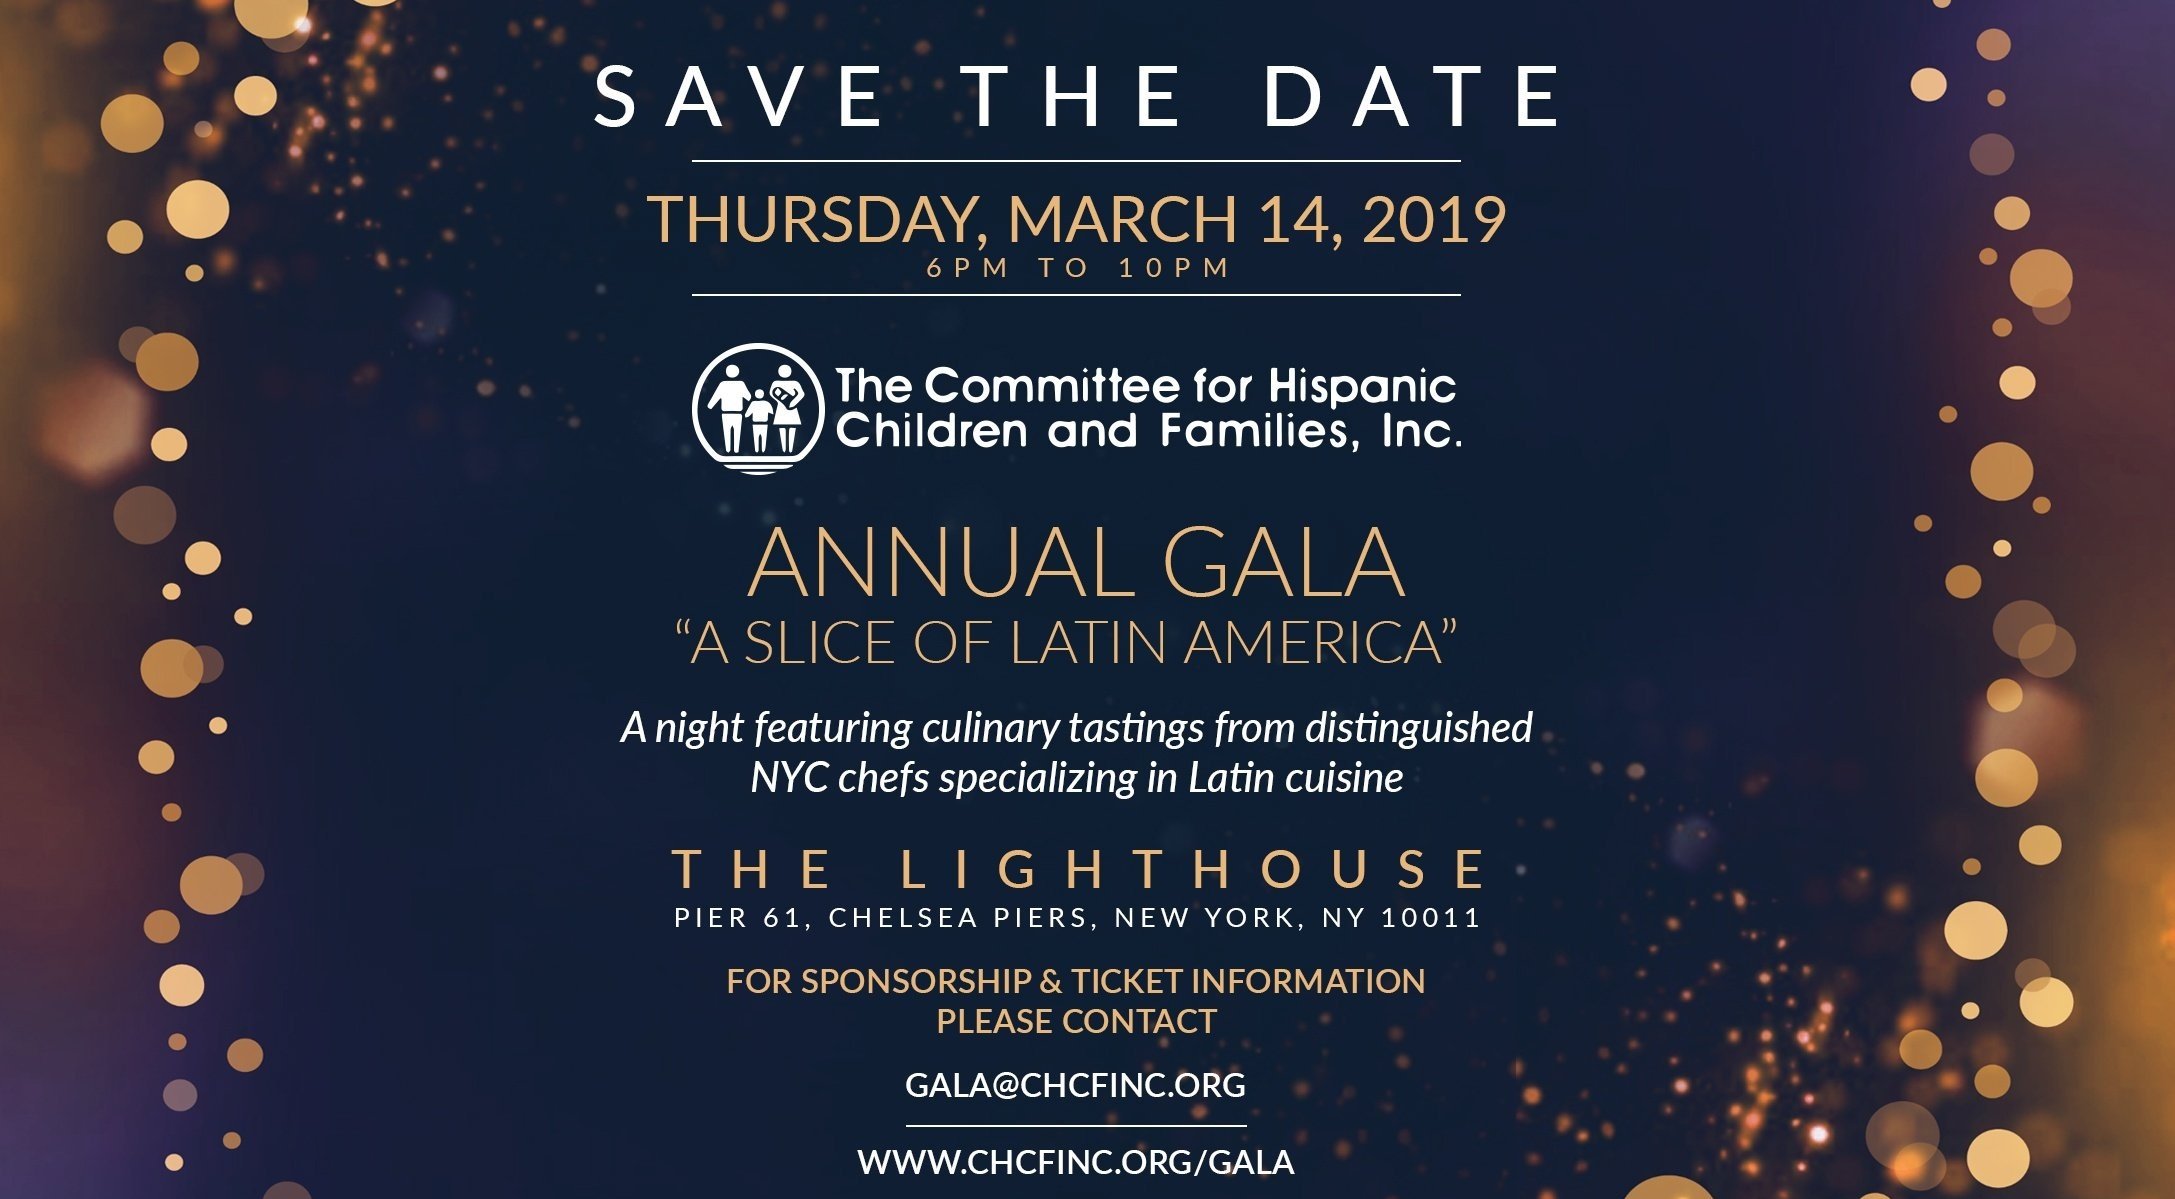 Save the Date: CHCF’s Annual Gala 'A Slice of Latin America'